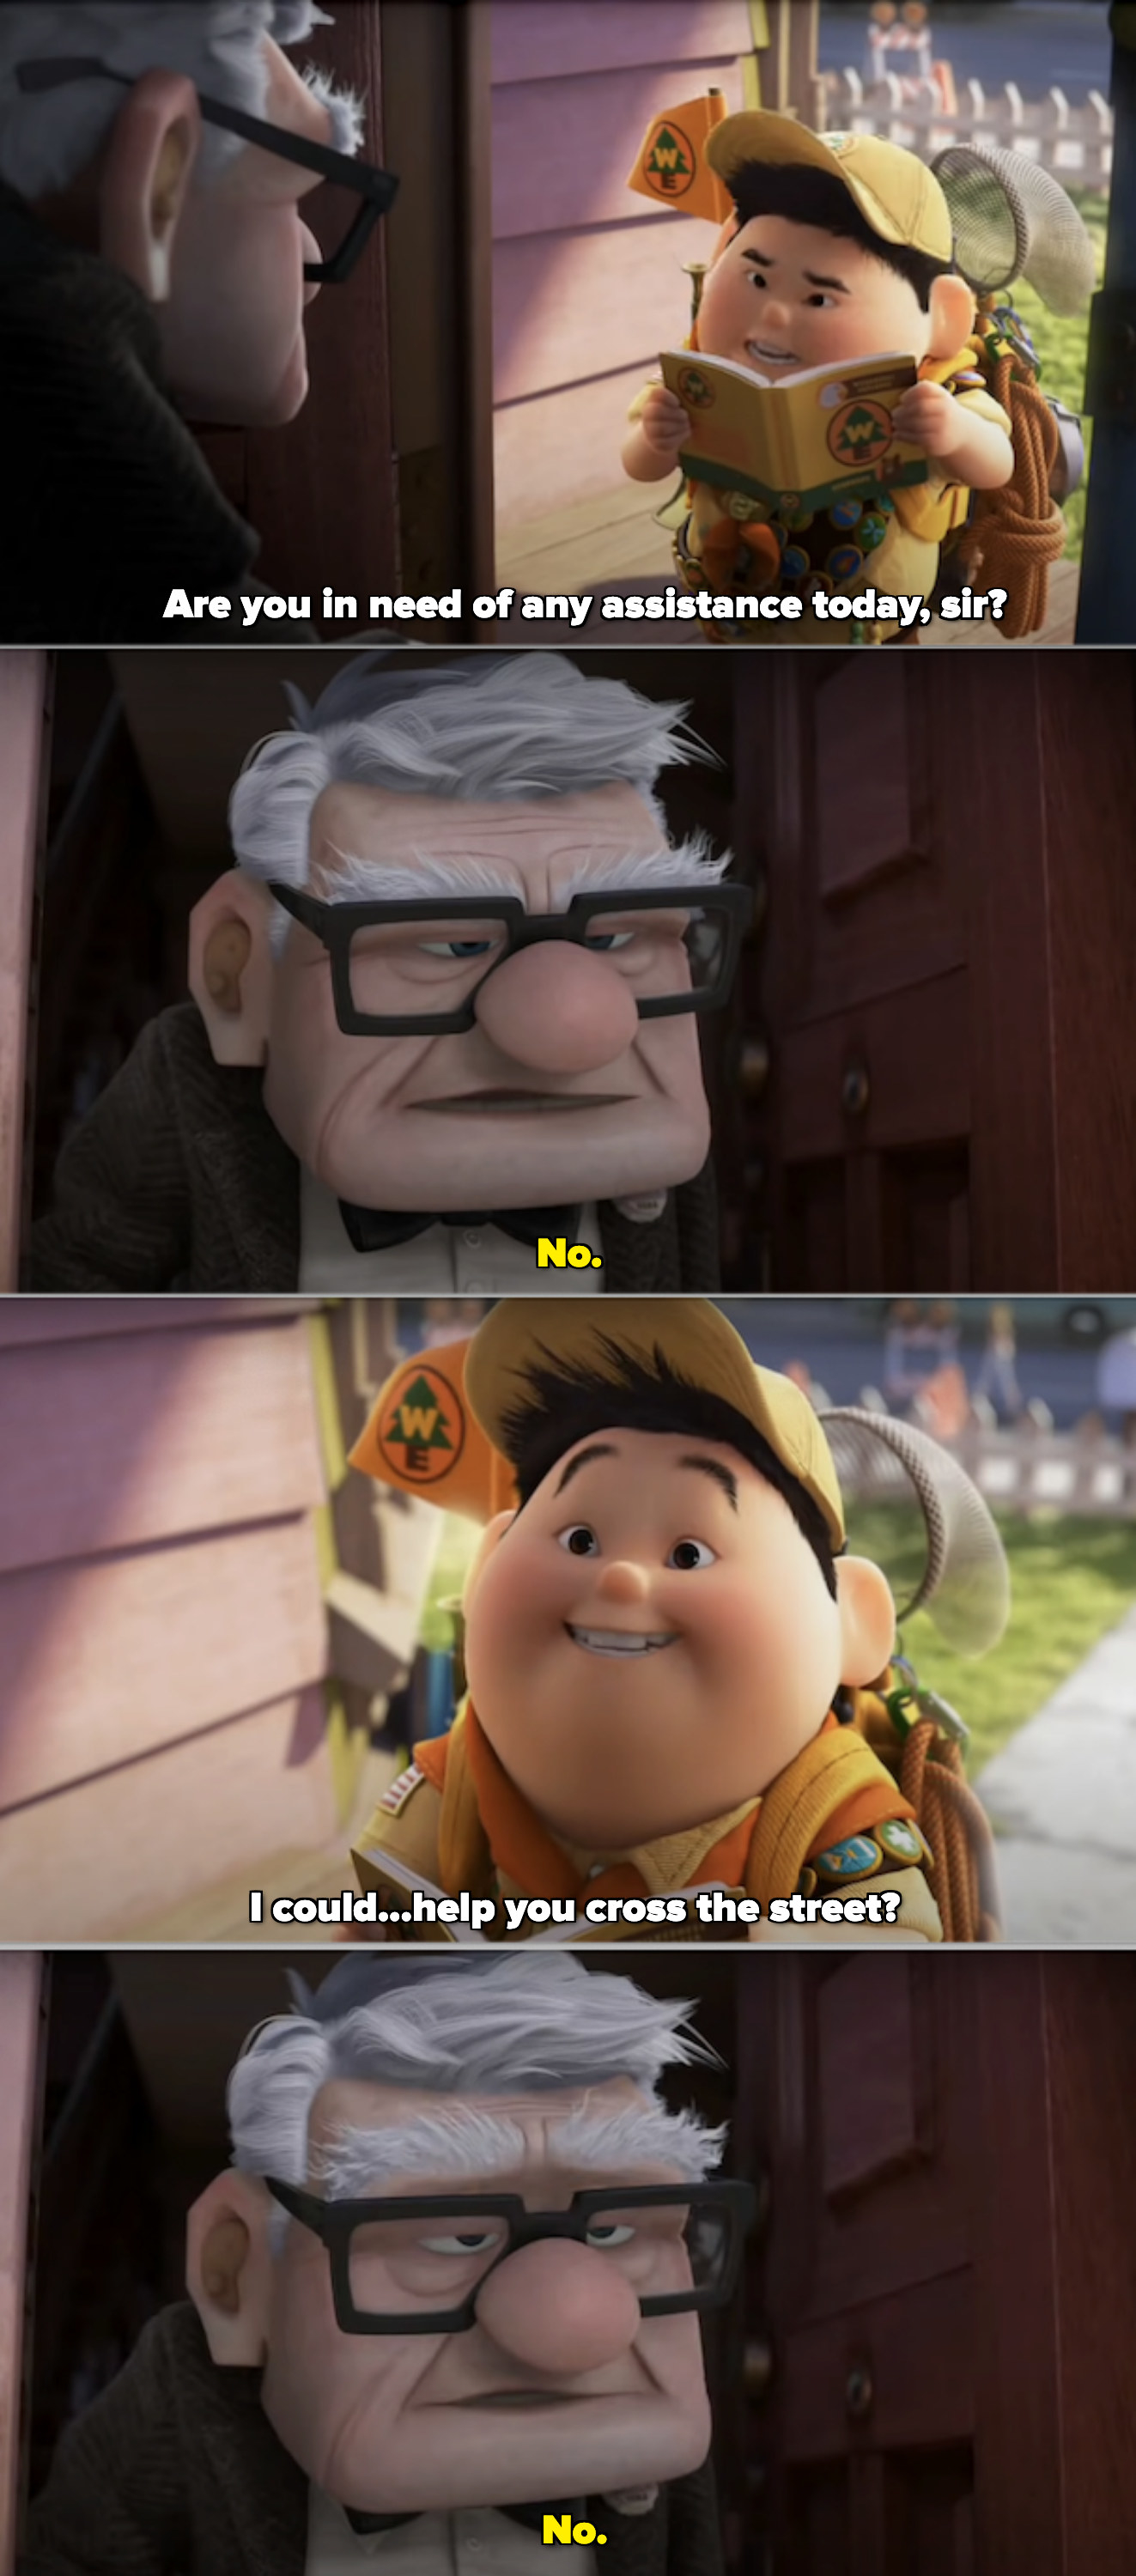 Carl talking with Russell outside his house